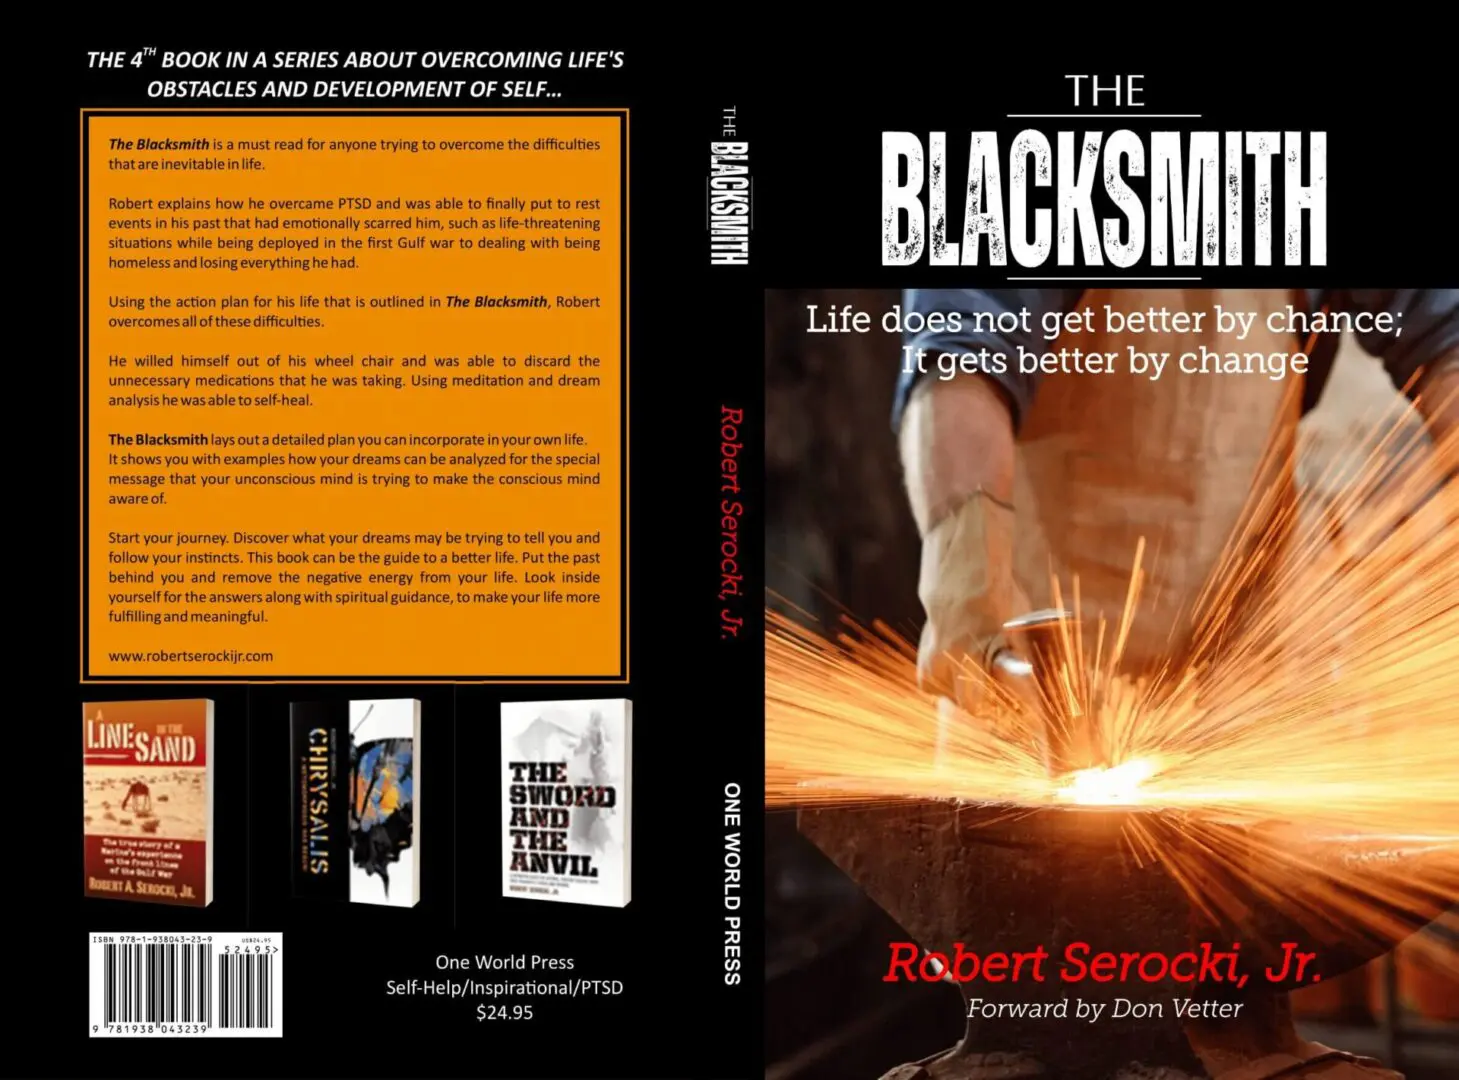 Blacksmith-Final-Cover-proof-07292022-1-1 (1)